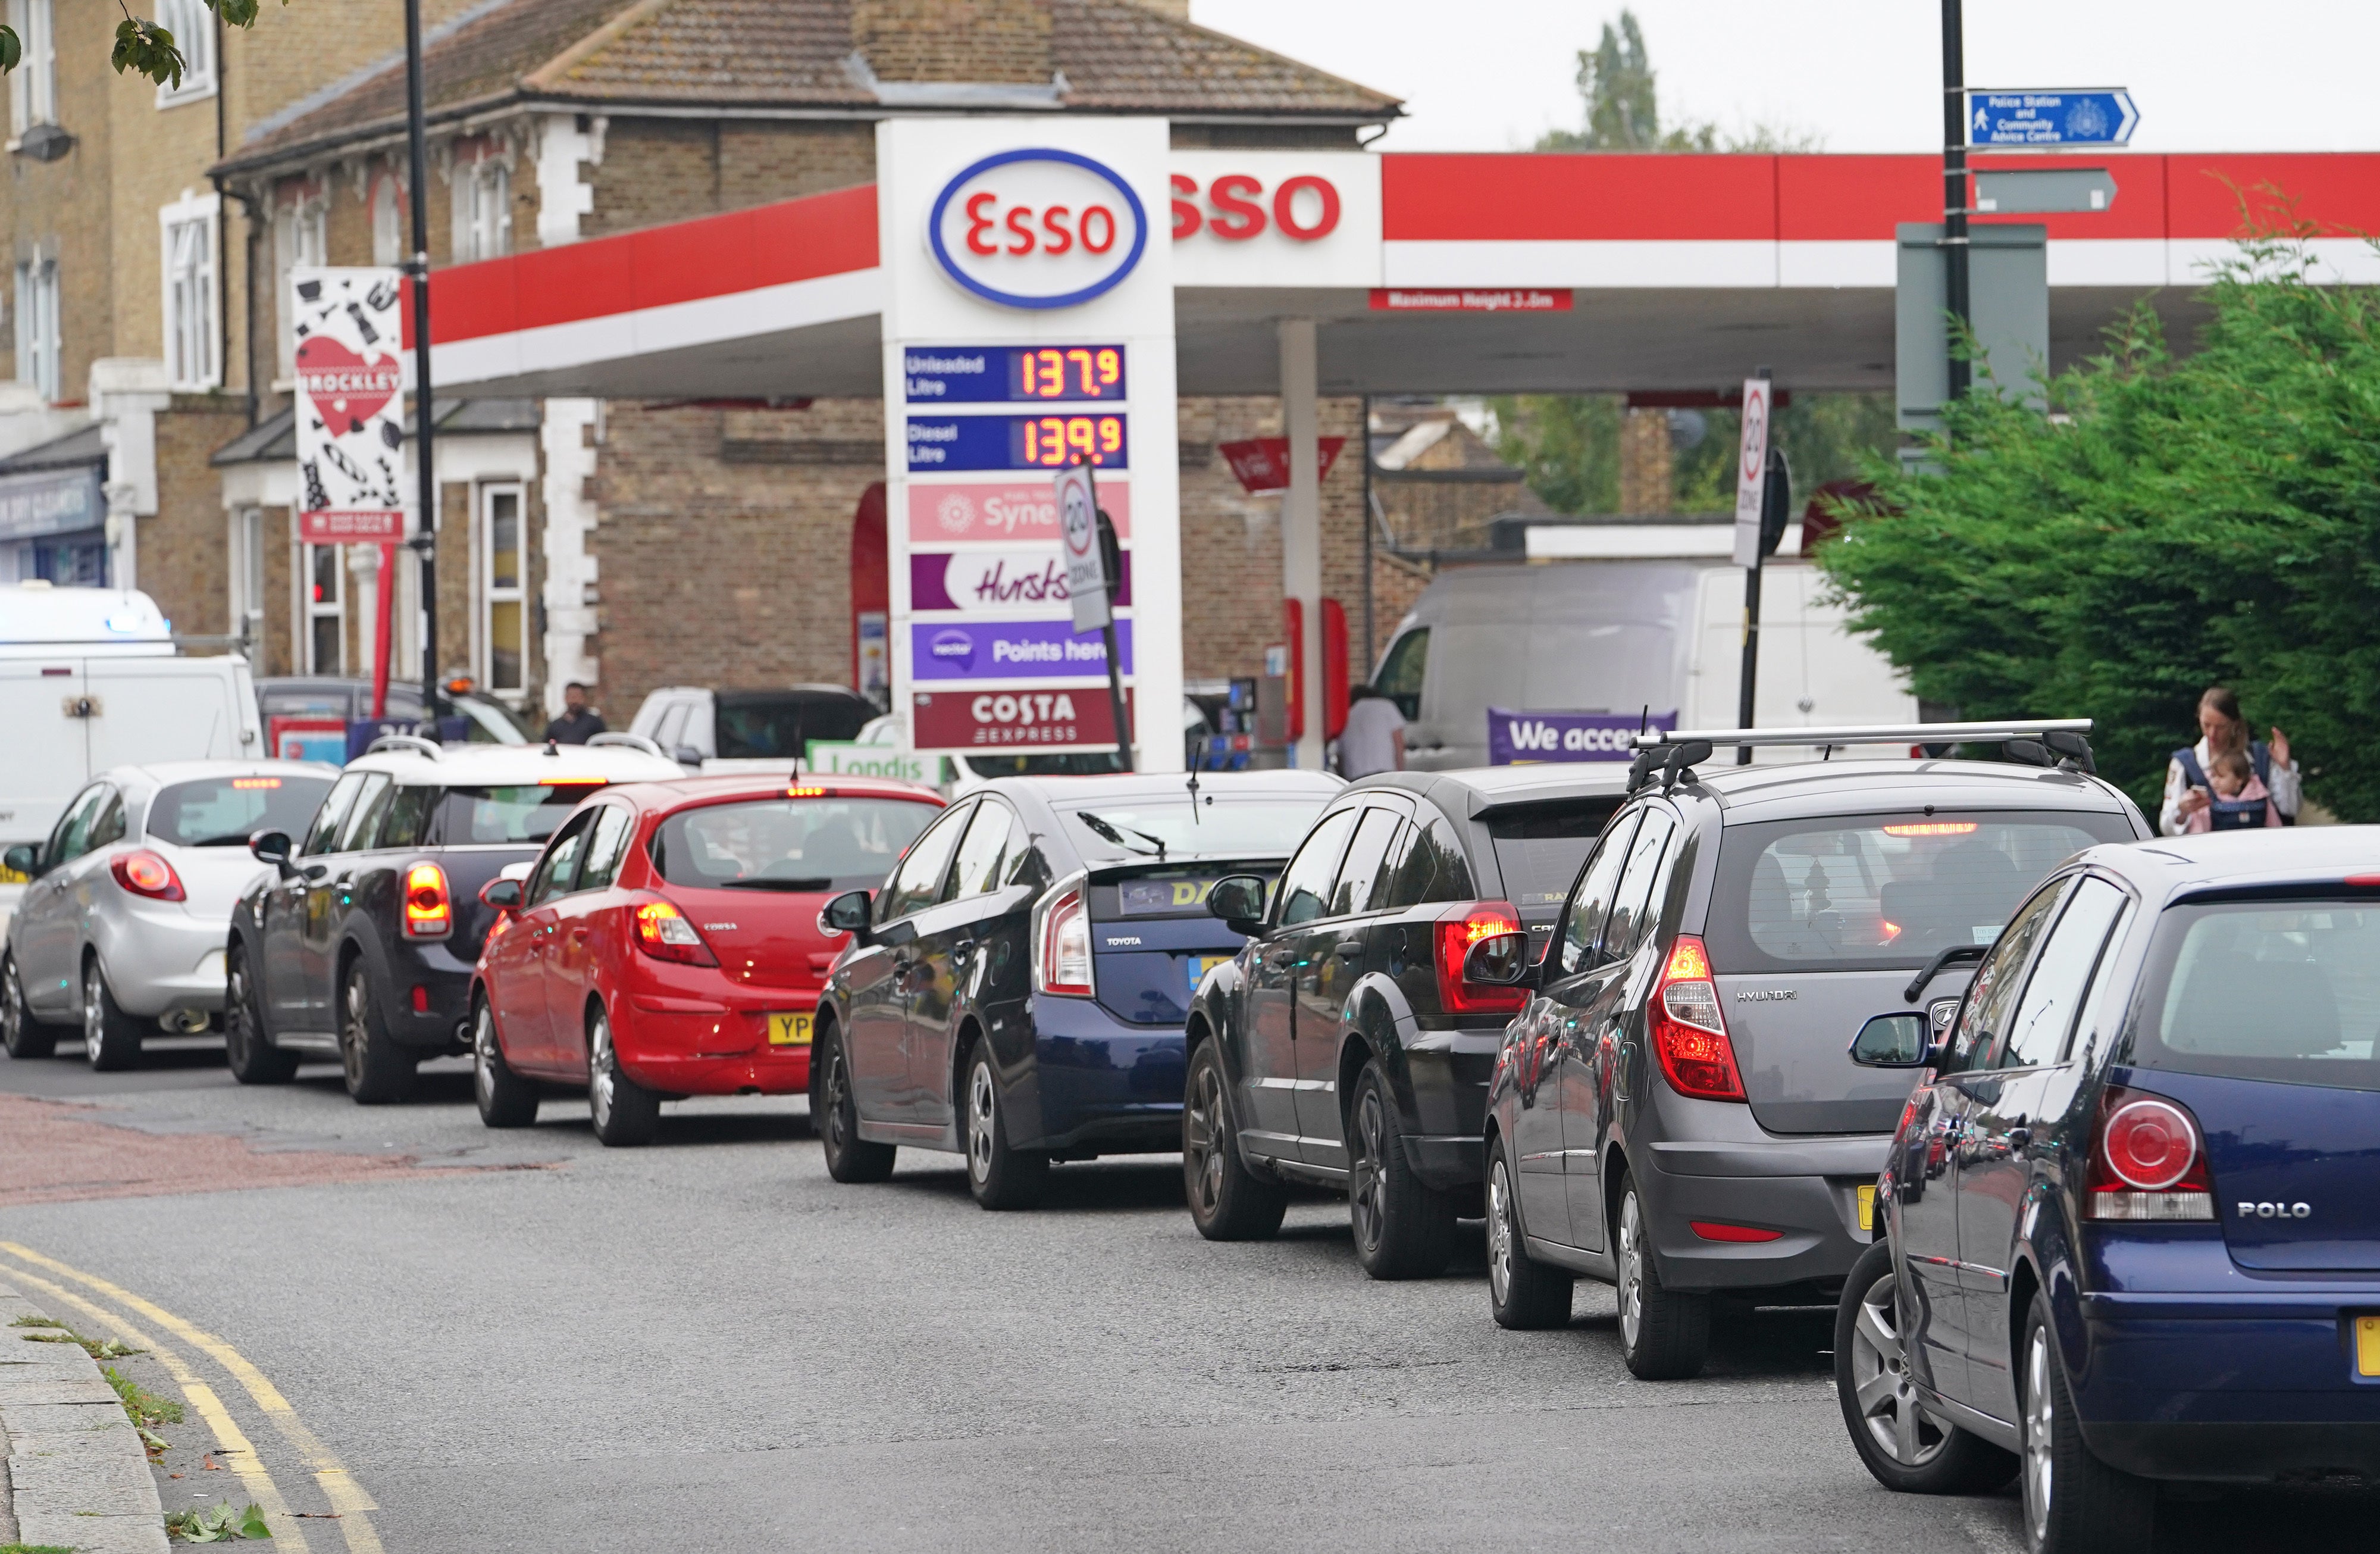 Motorists queue at an Esso petrol station in Brockley, south London (Dominic Lipinski/PA)